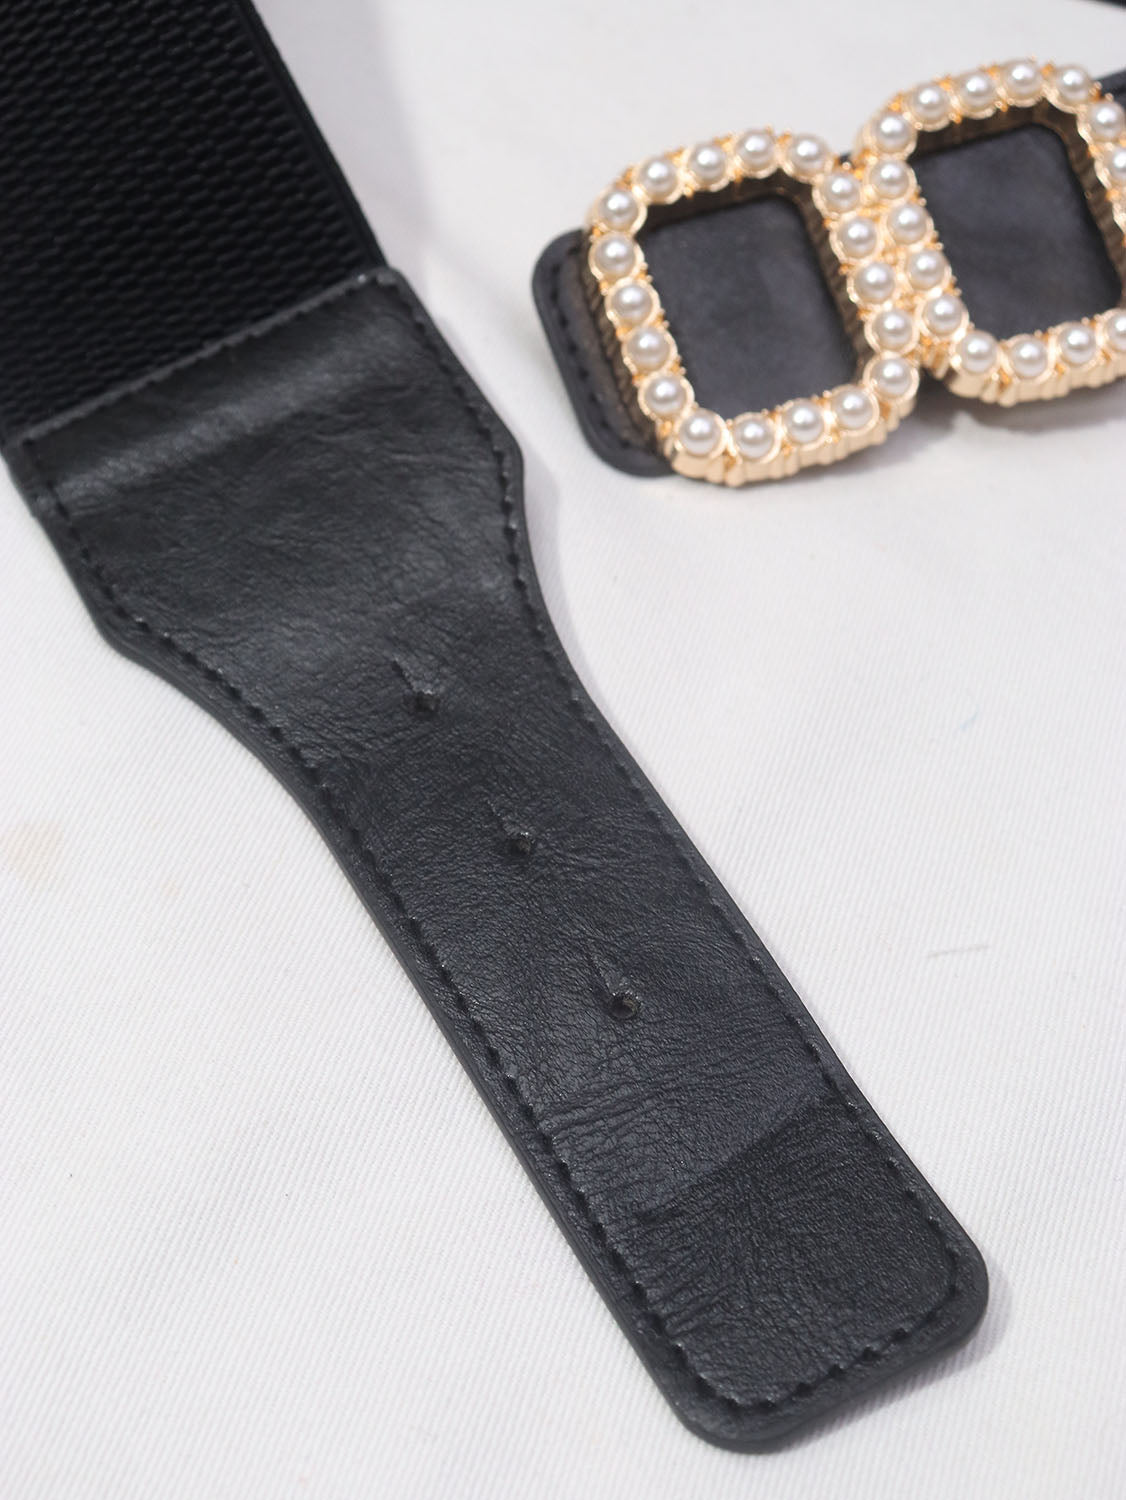 Stretchable Blackout Belts - Stylish & Secure Accessory for Professionals